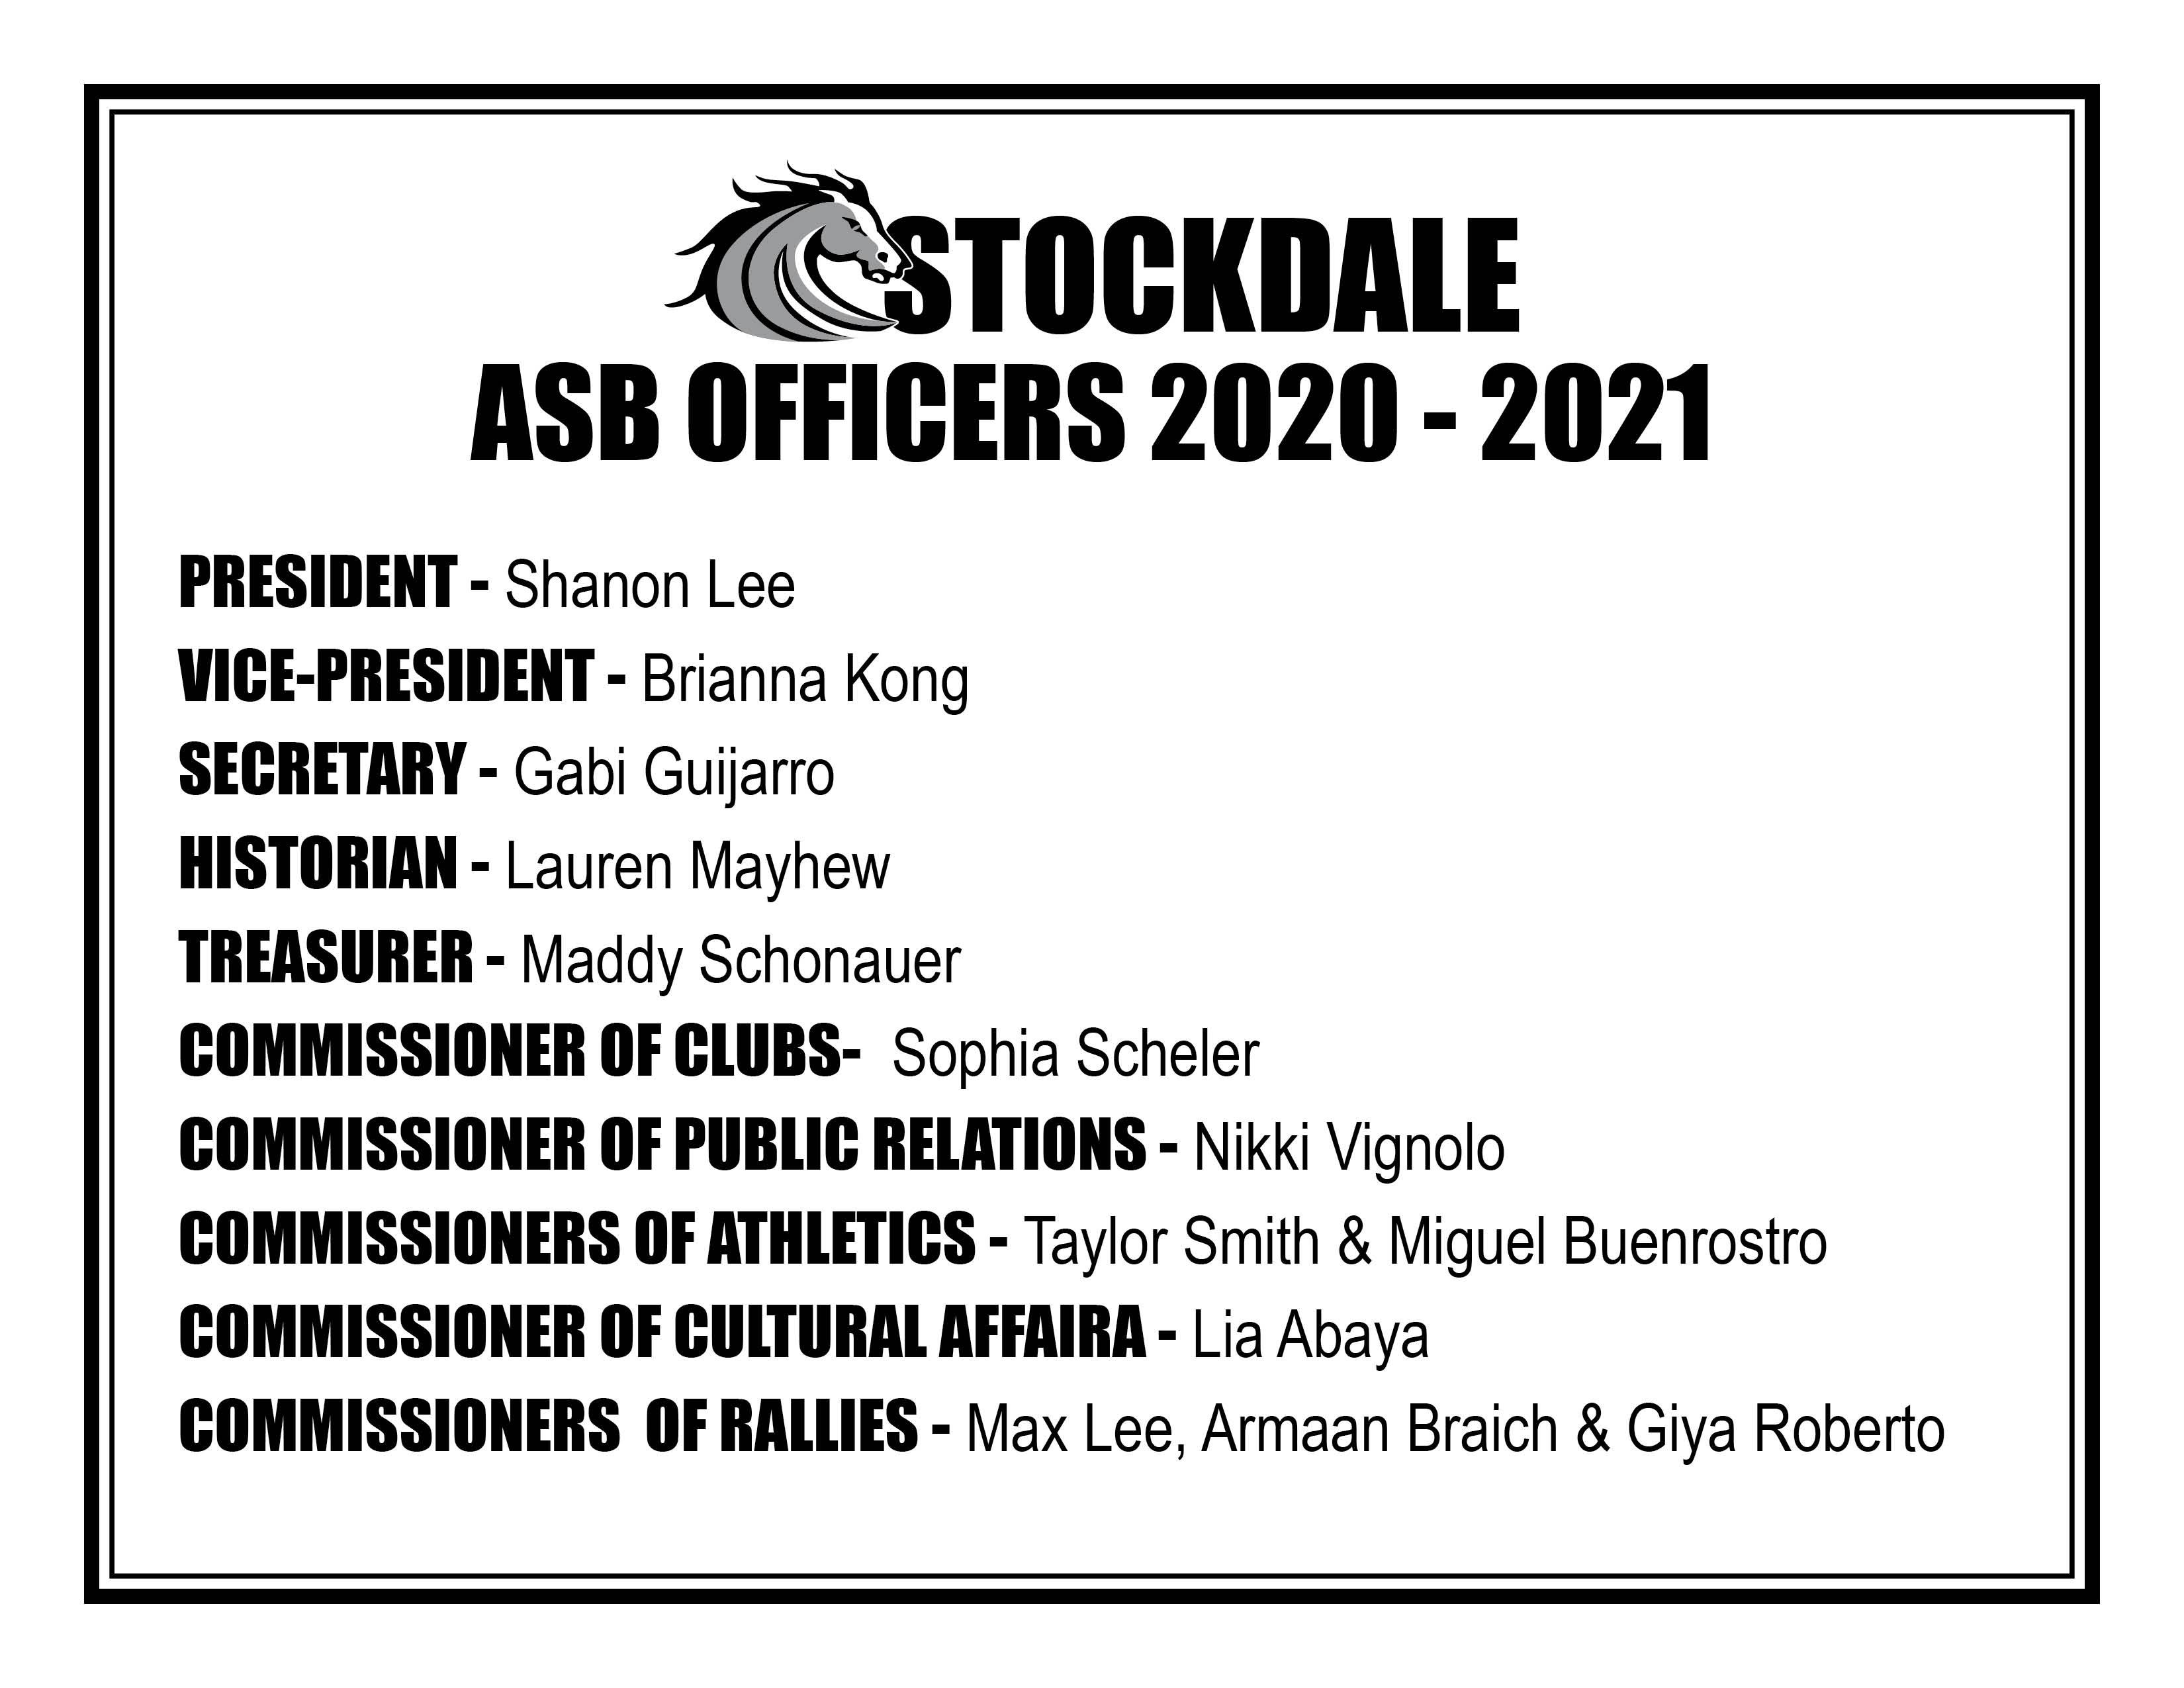 ASB Officers